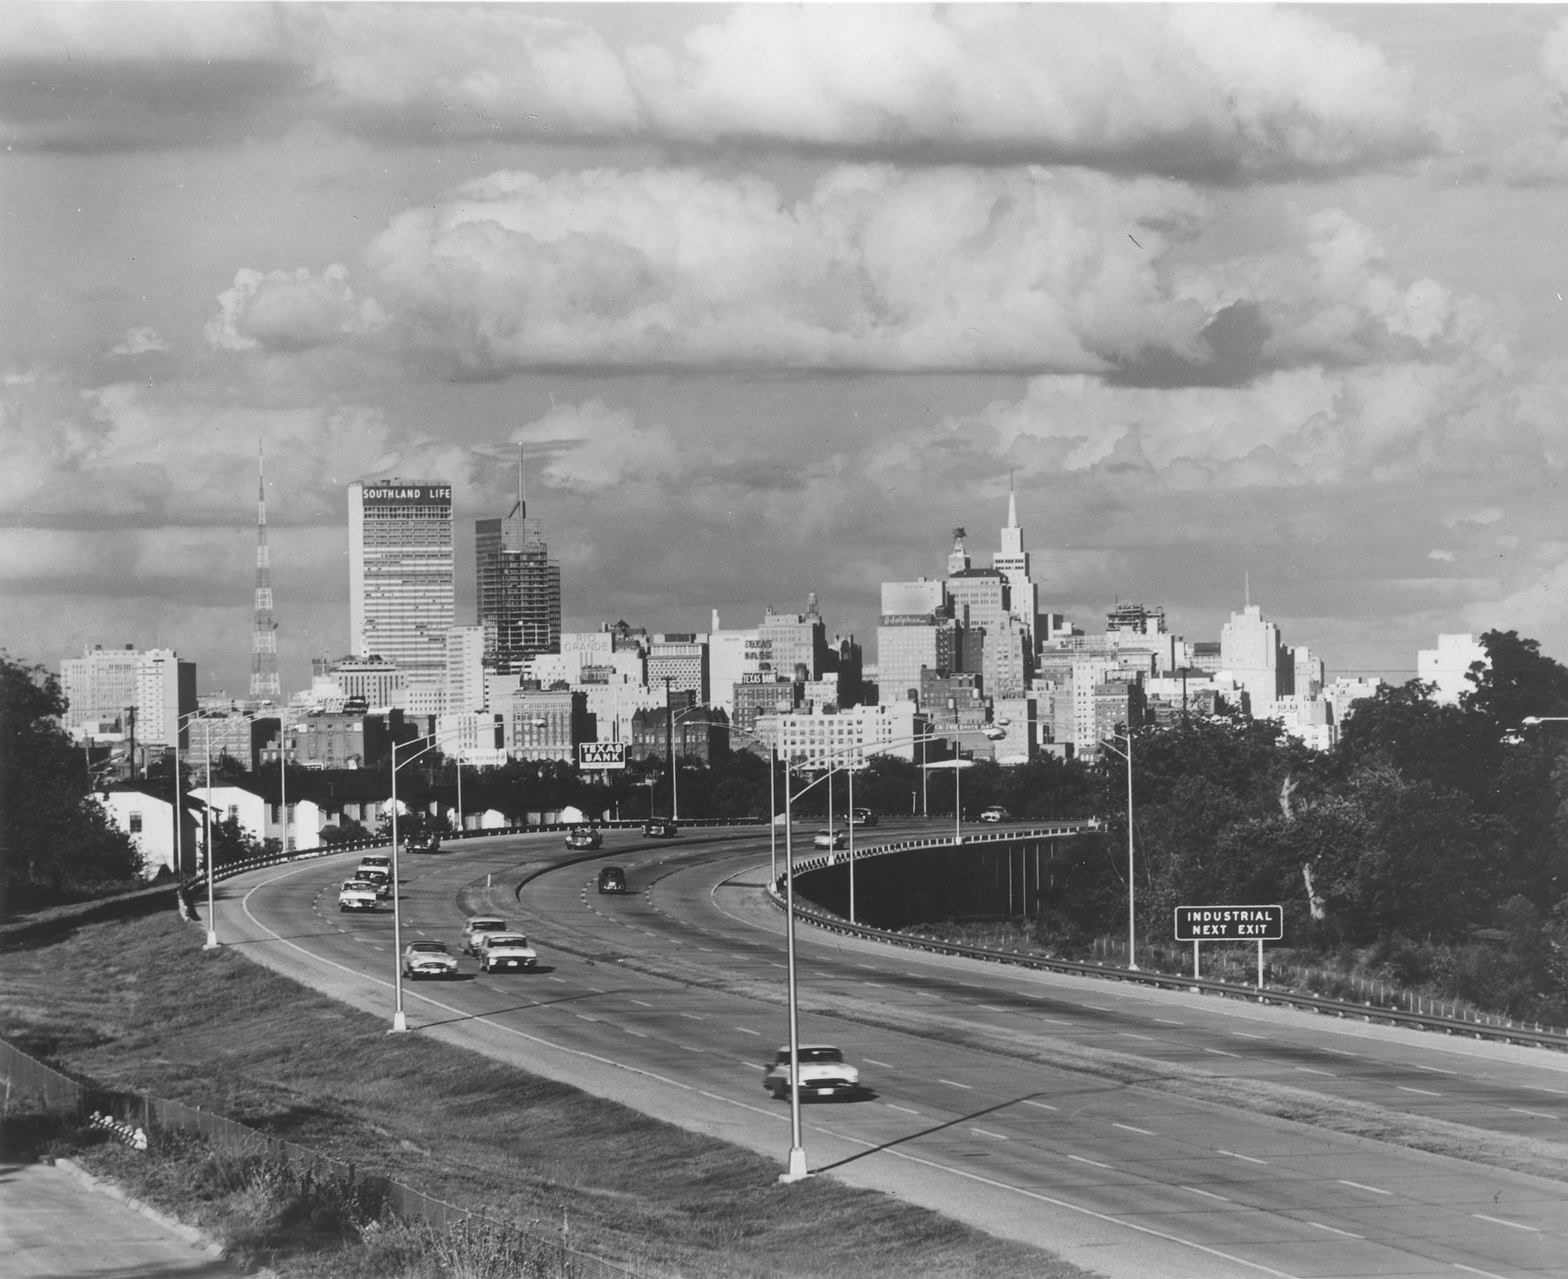 I-30 turnpike entering downtown Dallas, 1955